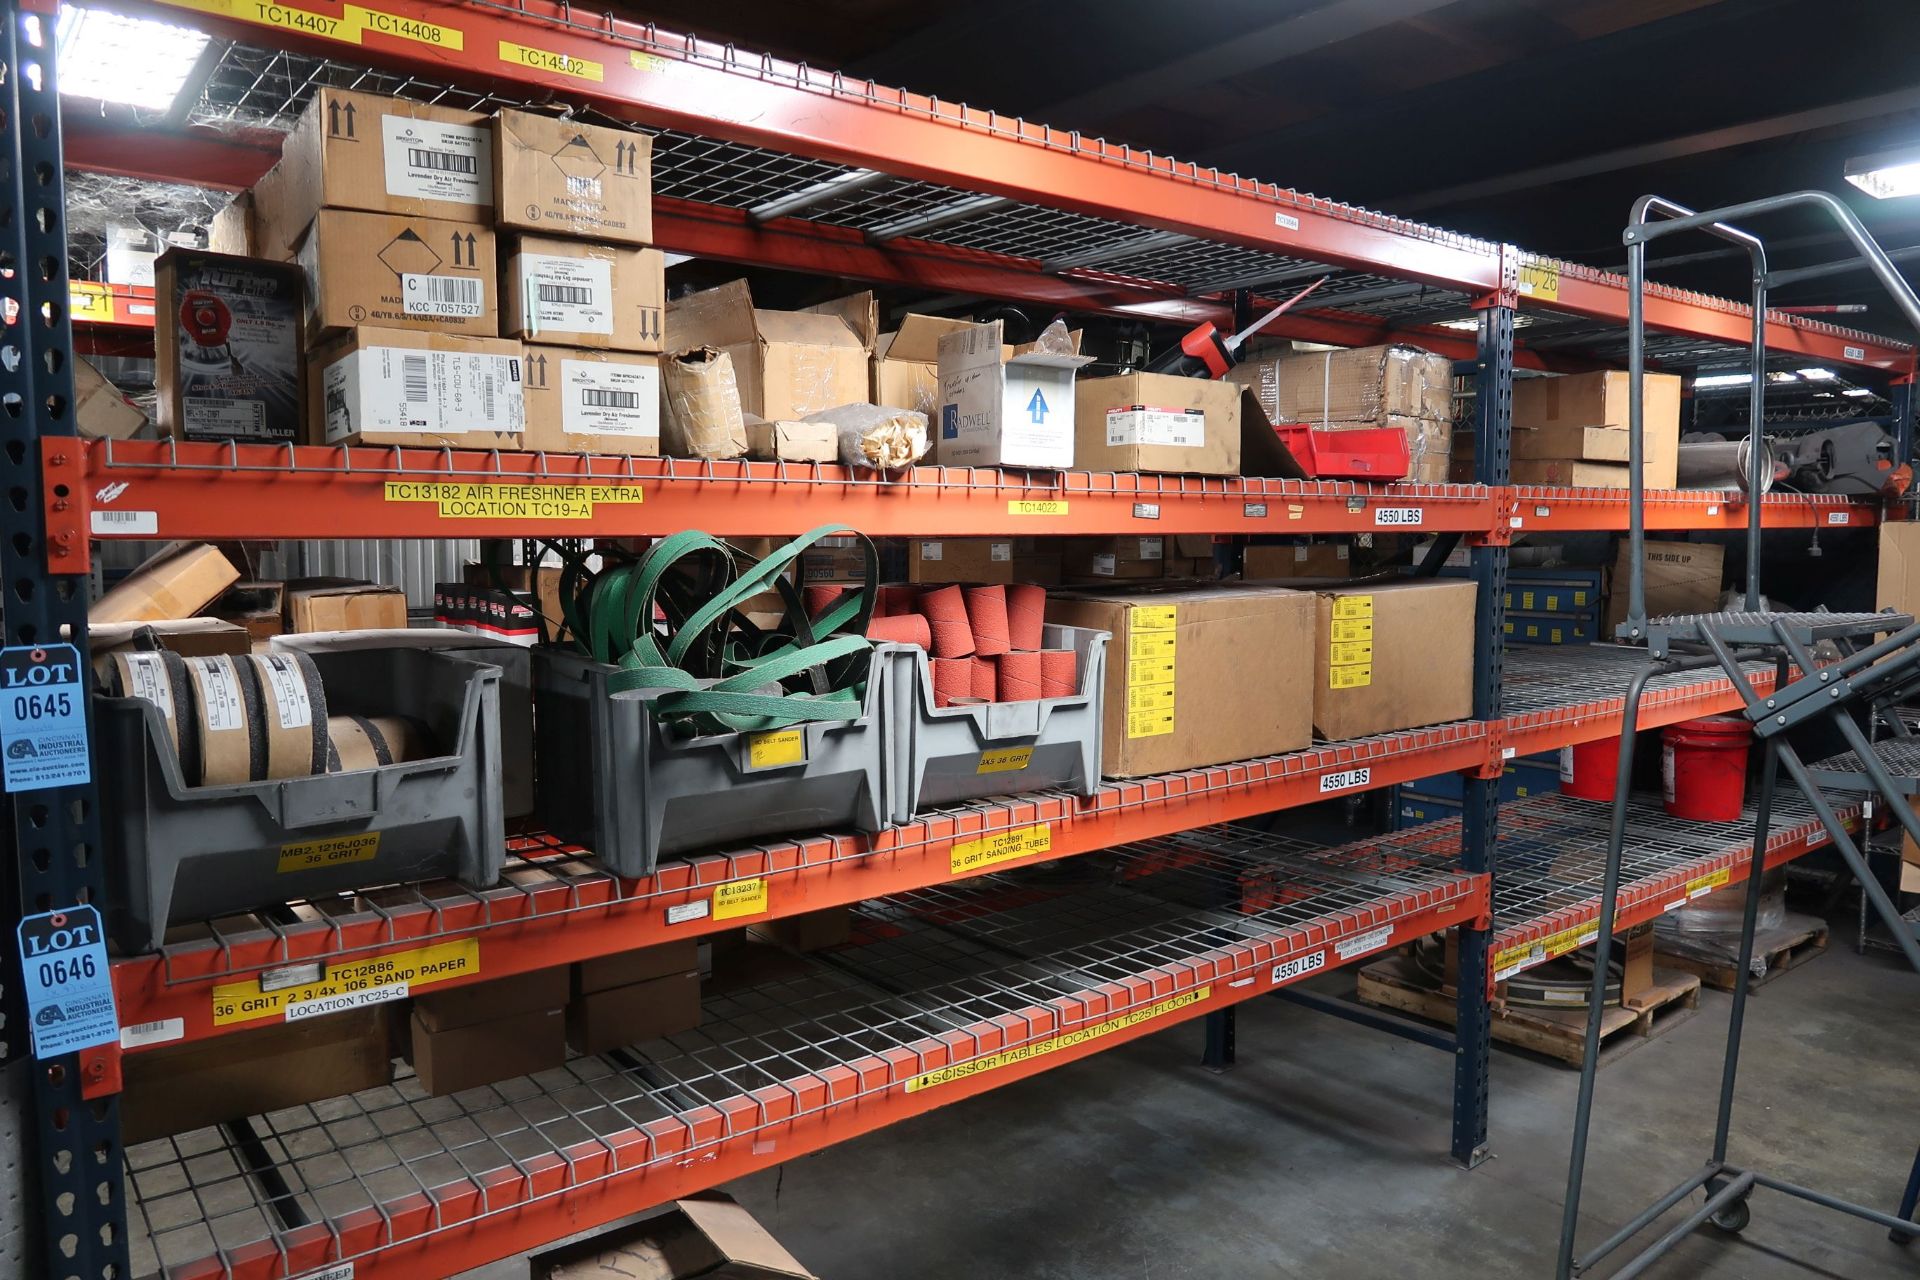 (LOT) CONTENTS OF (4) SECTIONS PALLET RACK - ABRASIVES AND MAINTENANCE ITEMS **LOADING PRICE DUE